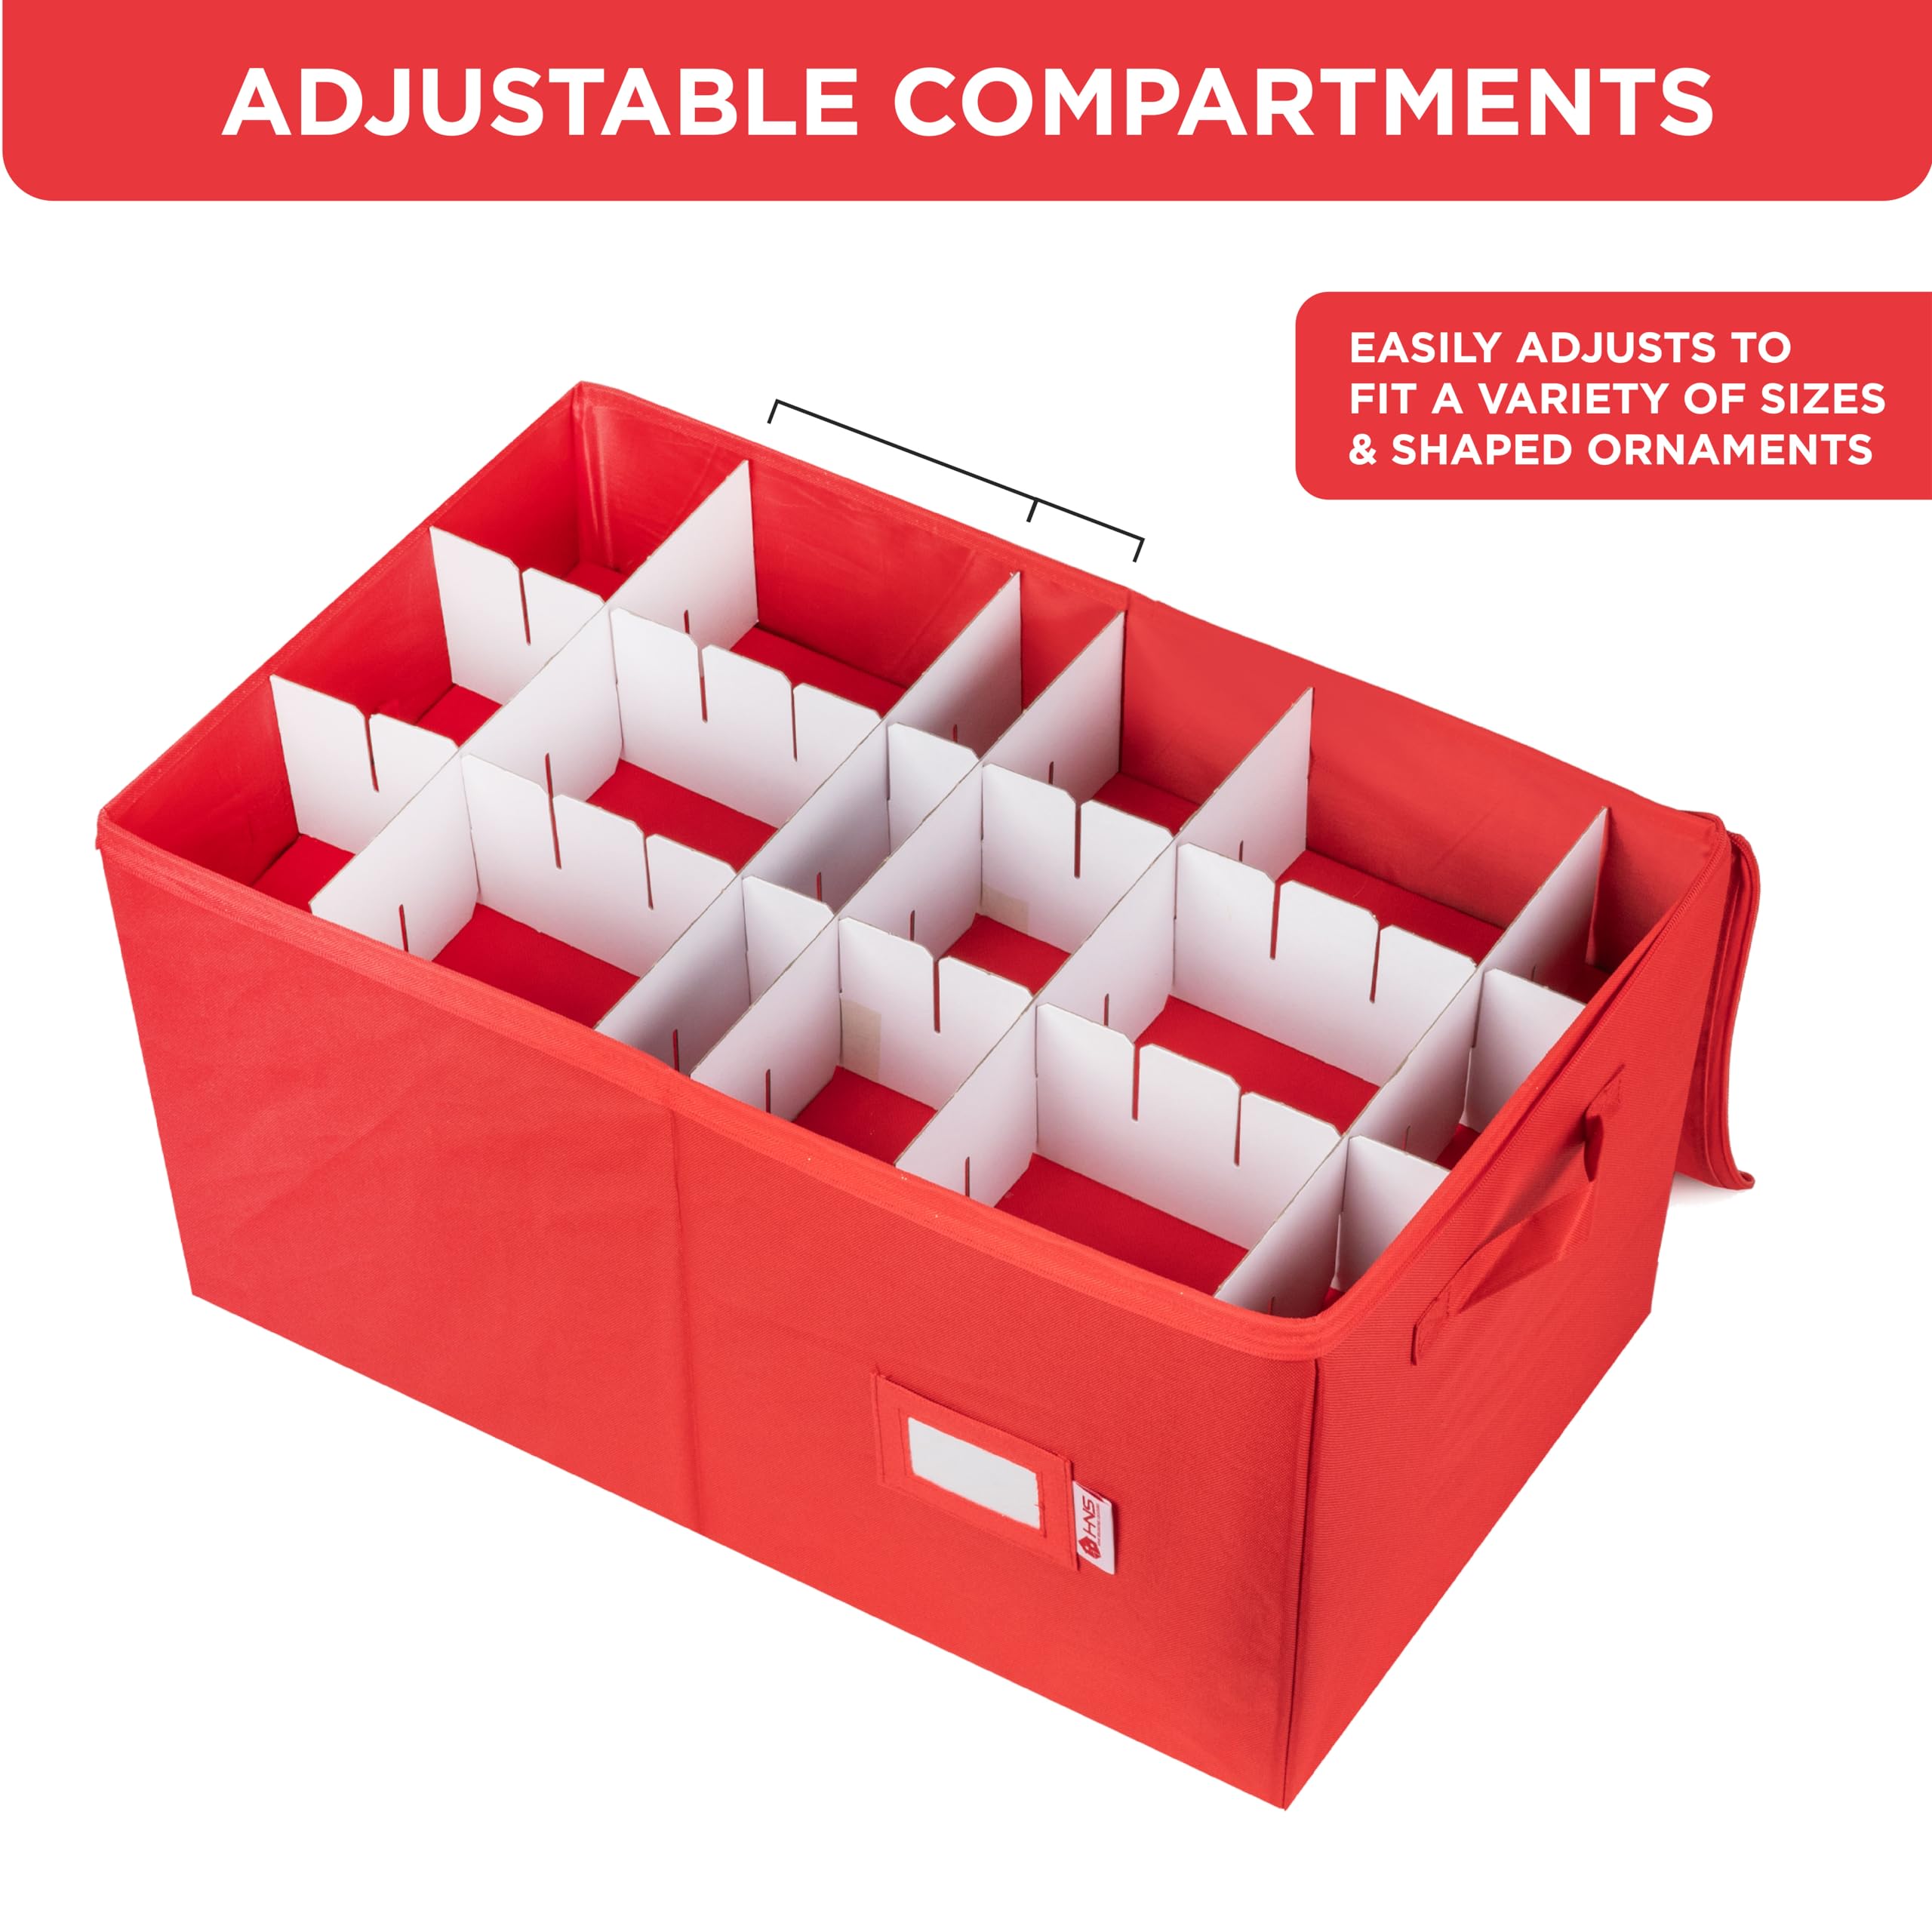 Christmas Ornament Storage Container with Dividers -Box Stores Up to 54-4" Ornaments, Zippered, Convenient, Adjustable, Heavy Duty 600D, Large Organizer Bin to Protect and Store Holiday D�cor (Red)  - Acceptable